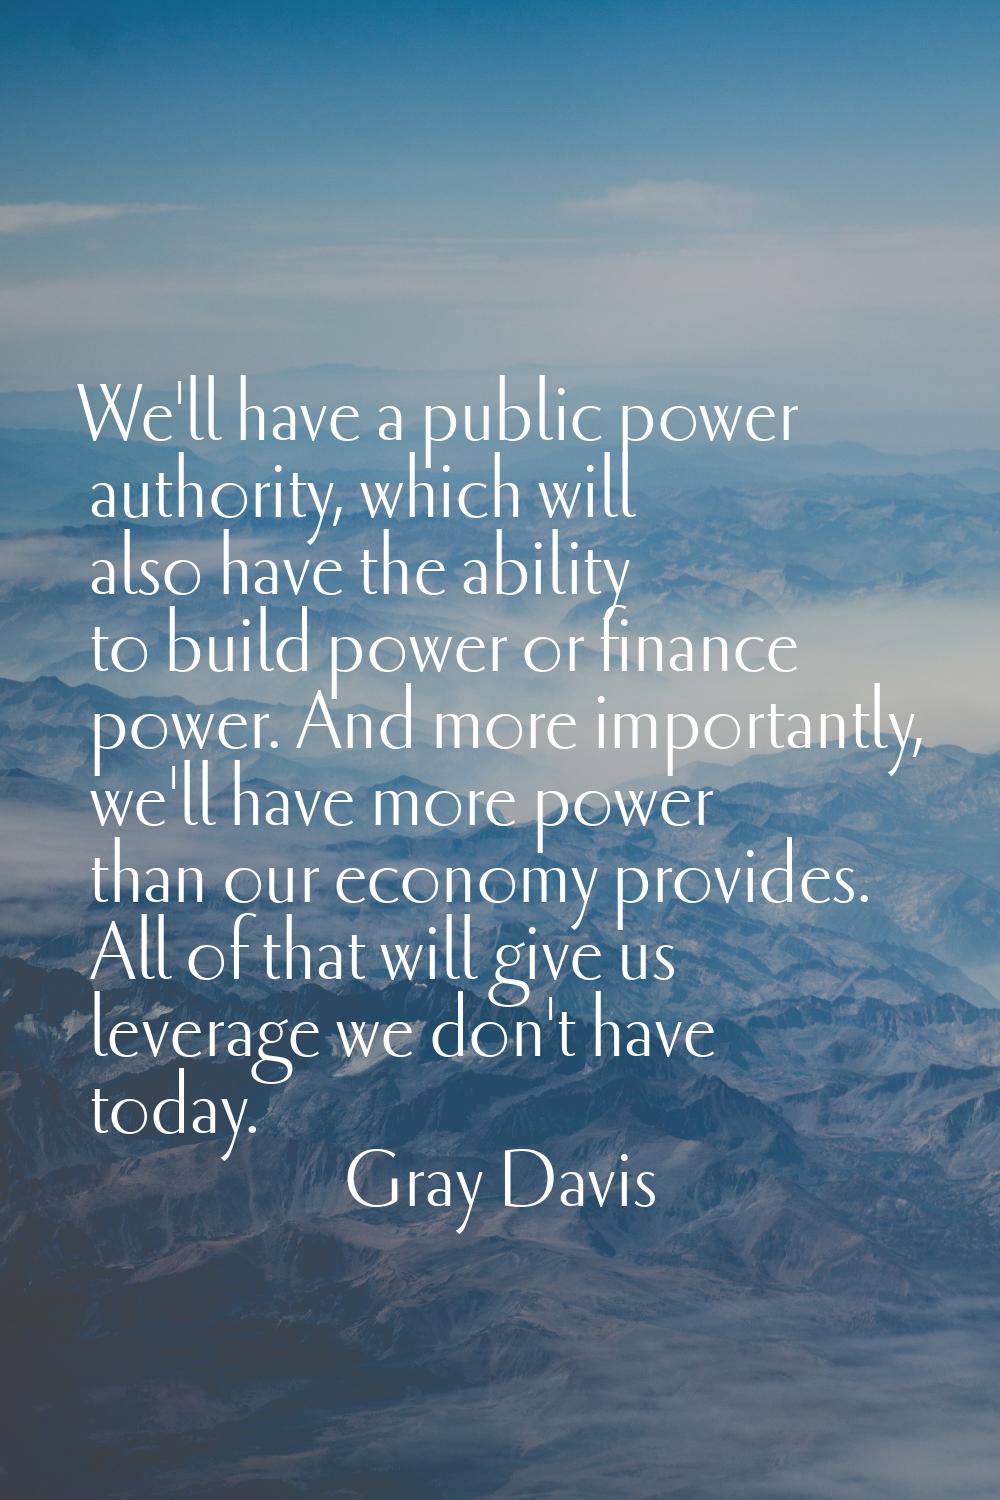 We'll have a public power authority, which will also have the ability to build power or finance pow